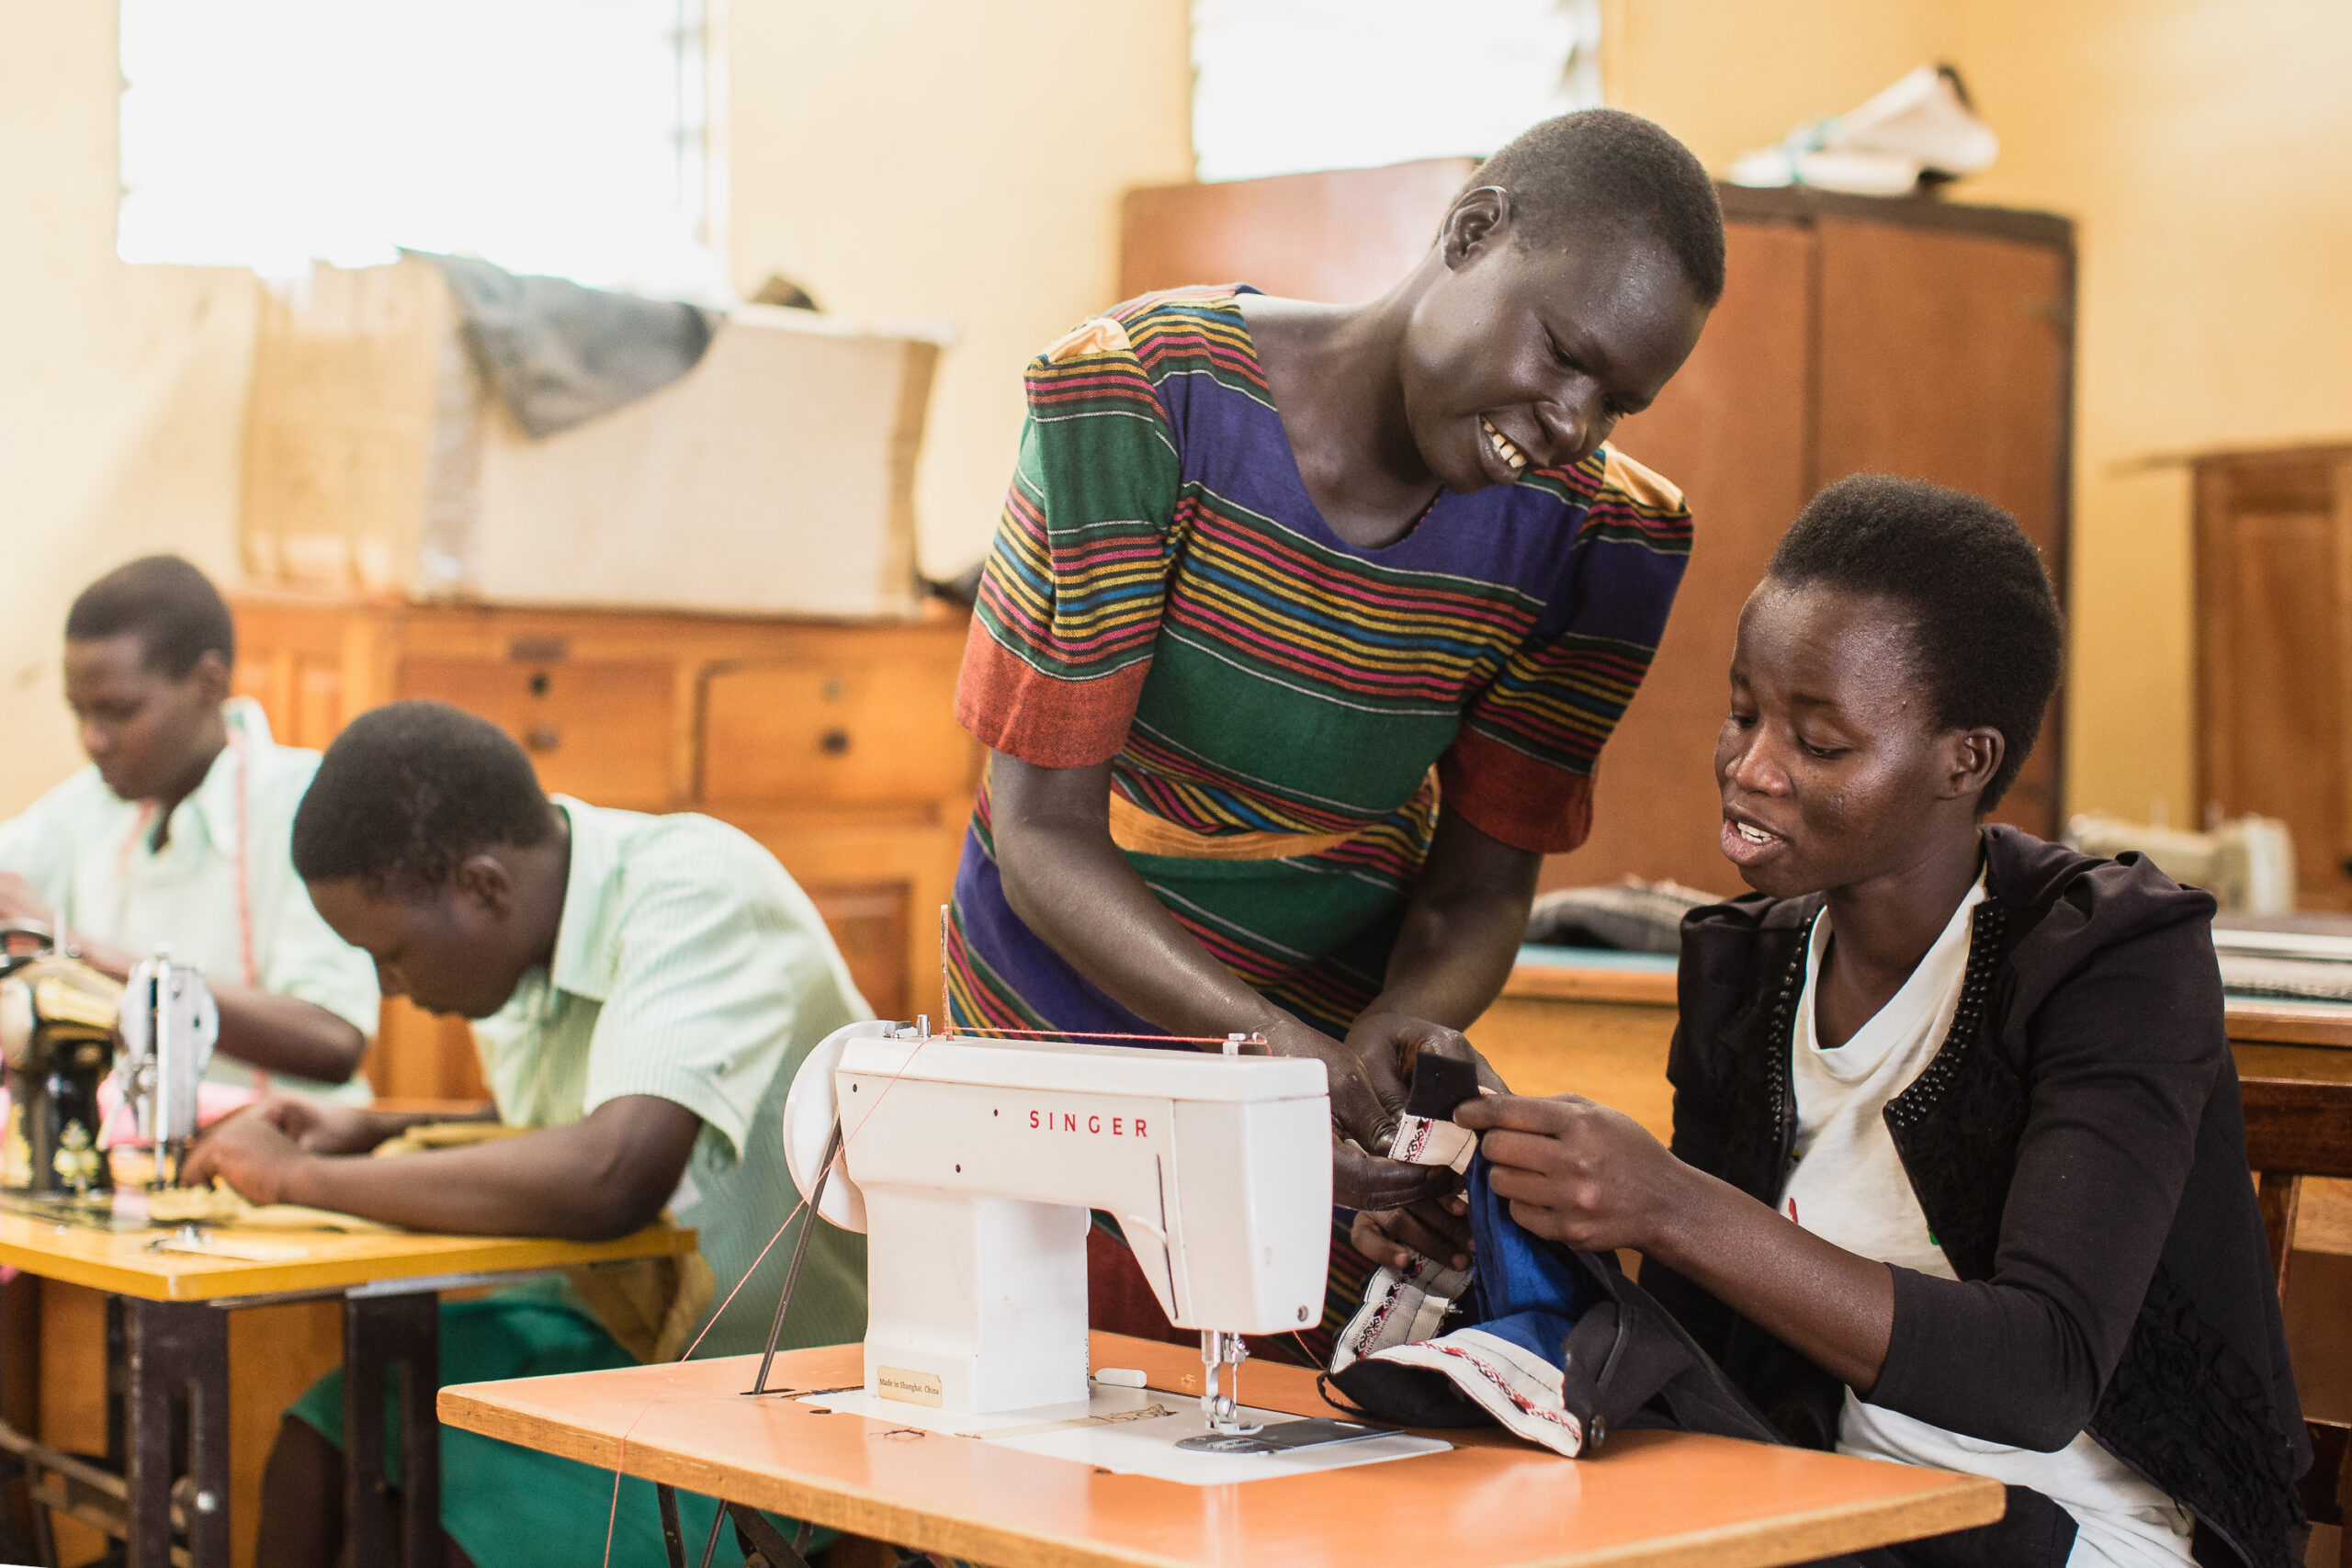 Women teacher in Uganda explaining a student how to use a sewing machine.